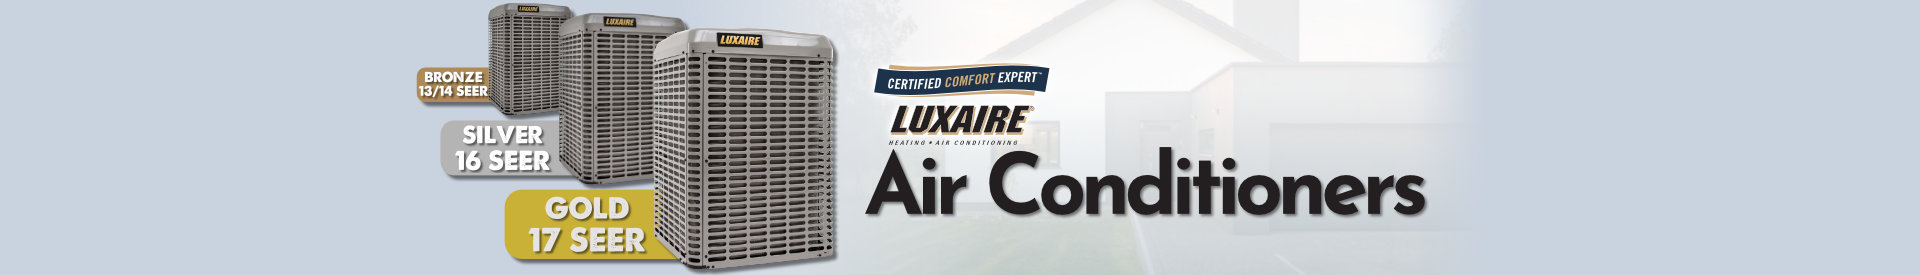 Luxaire Air Conditioner Banner